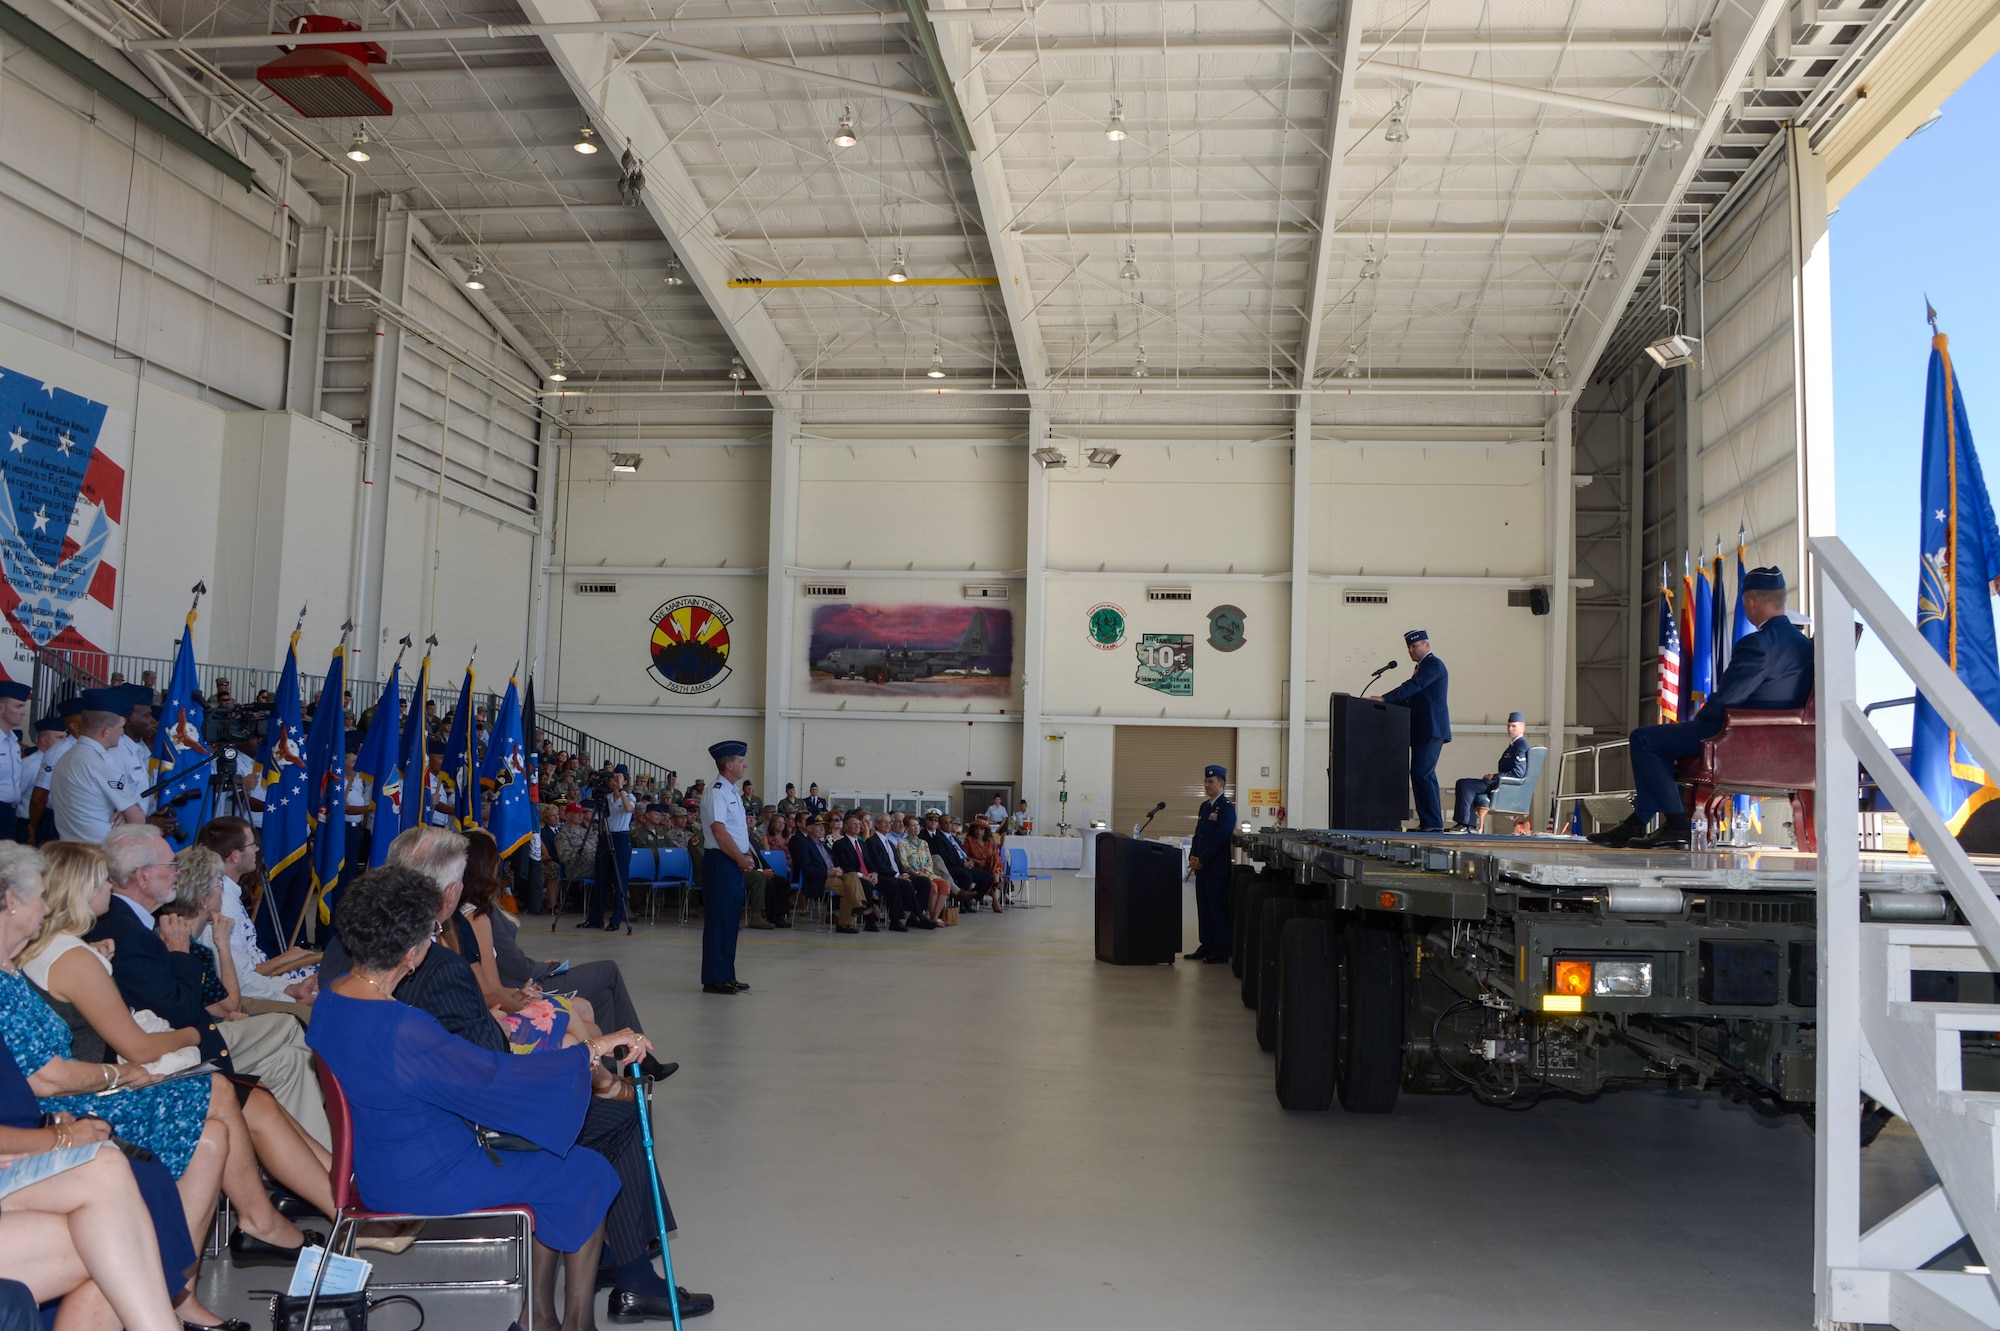 Lt. Gen. Chris Nowland, former commander of Twelfth Air Force (Air Forces Southern), thanked the Airmen for their hard work and dedication to the mission during the Twelfth Air Force (Air Forces Southern) change of command ceremony Oct. 3, 2016, at Davis-Monthan Air Force Base, Ariz. During the ceremony Lt. Gen. Chris Nowland relinquished command to Lt. Gen. Mark Kelly. Air Forces Southern serves as the air component to U.S. Southern Command and is responsible for providing air and space capabilities in support of U.S. military partnerships across Central and South America, and the Caribbean. (U.S. Air Force photo by Tech. Sgt. Heather Redman)